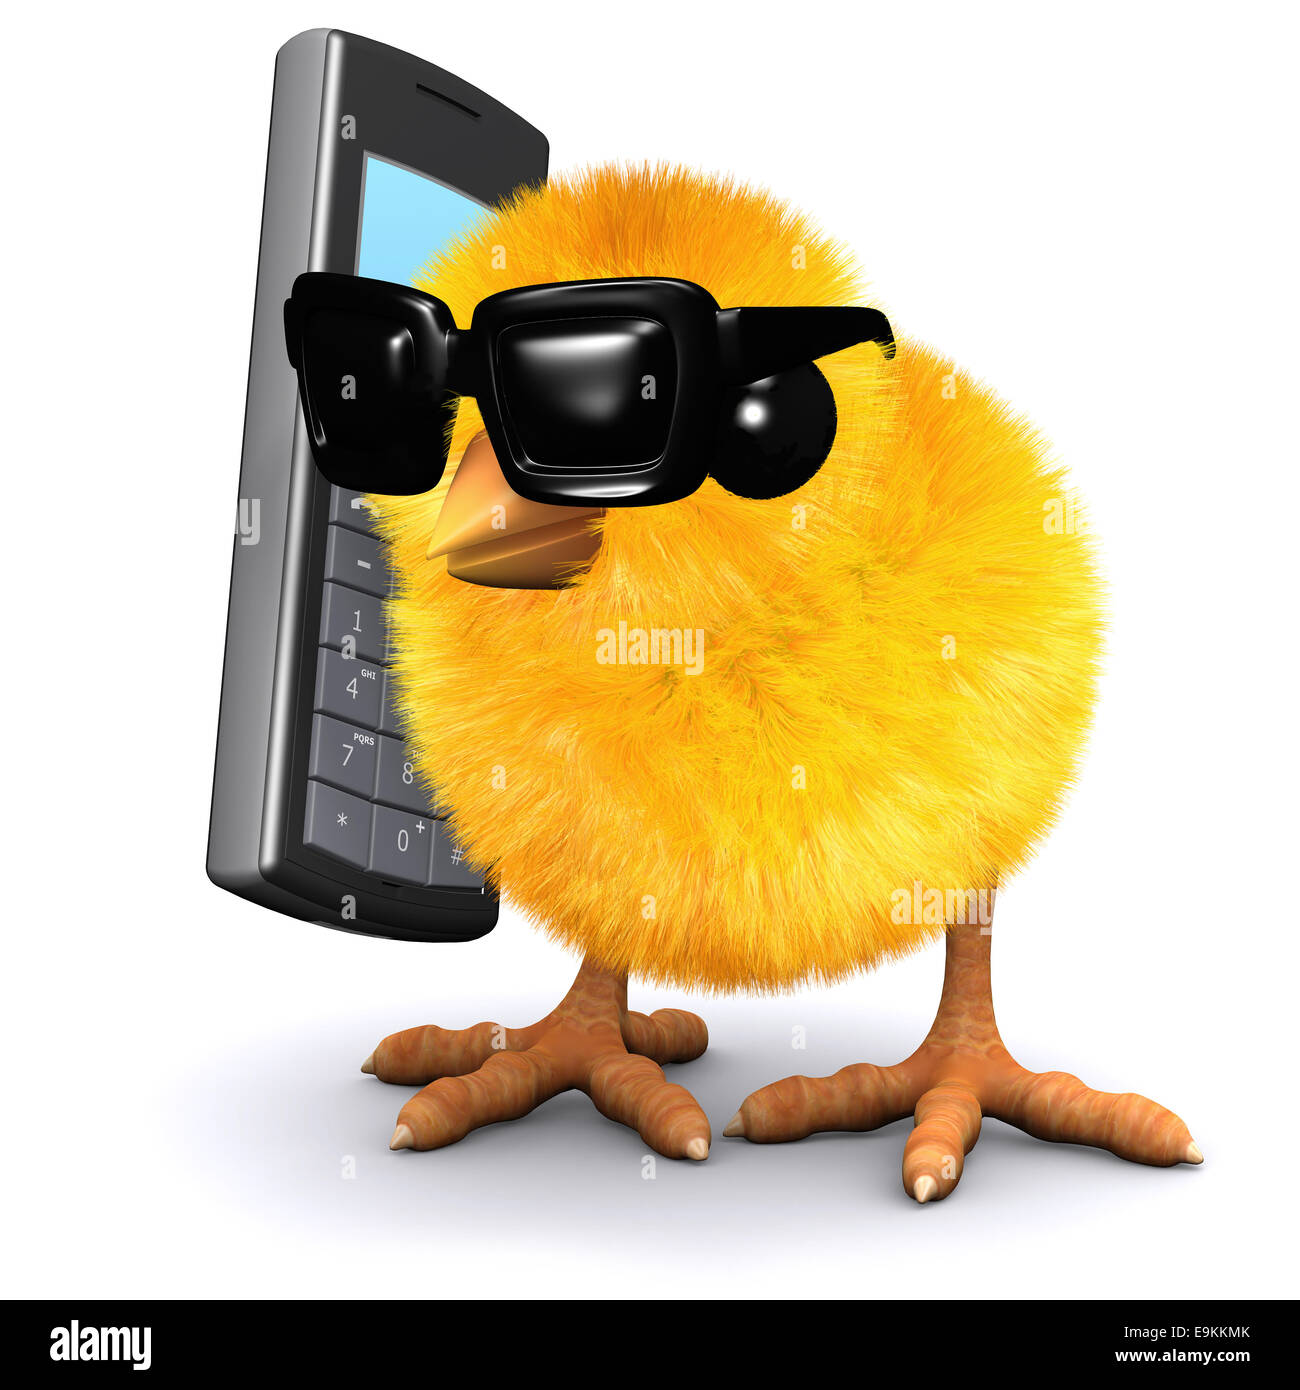 3d render of a chick wearing sunglasses chatting on a mobile phone Stock Photo